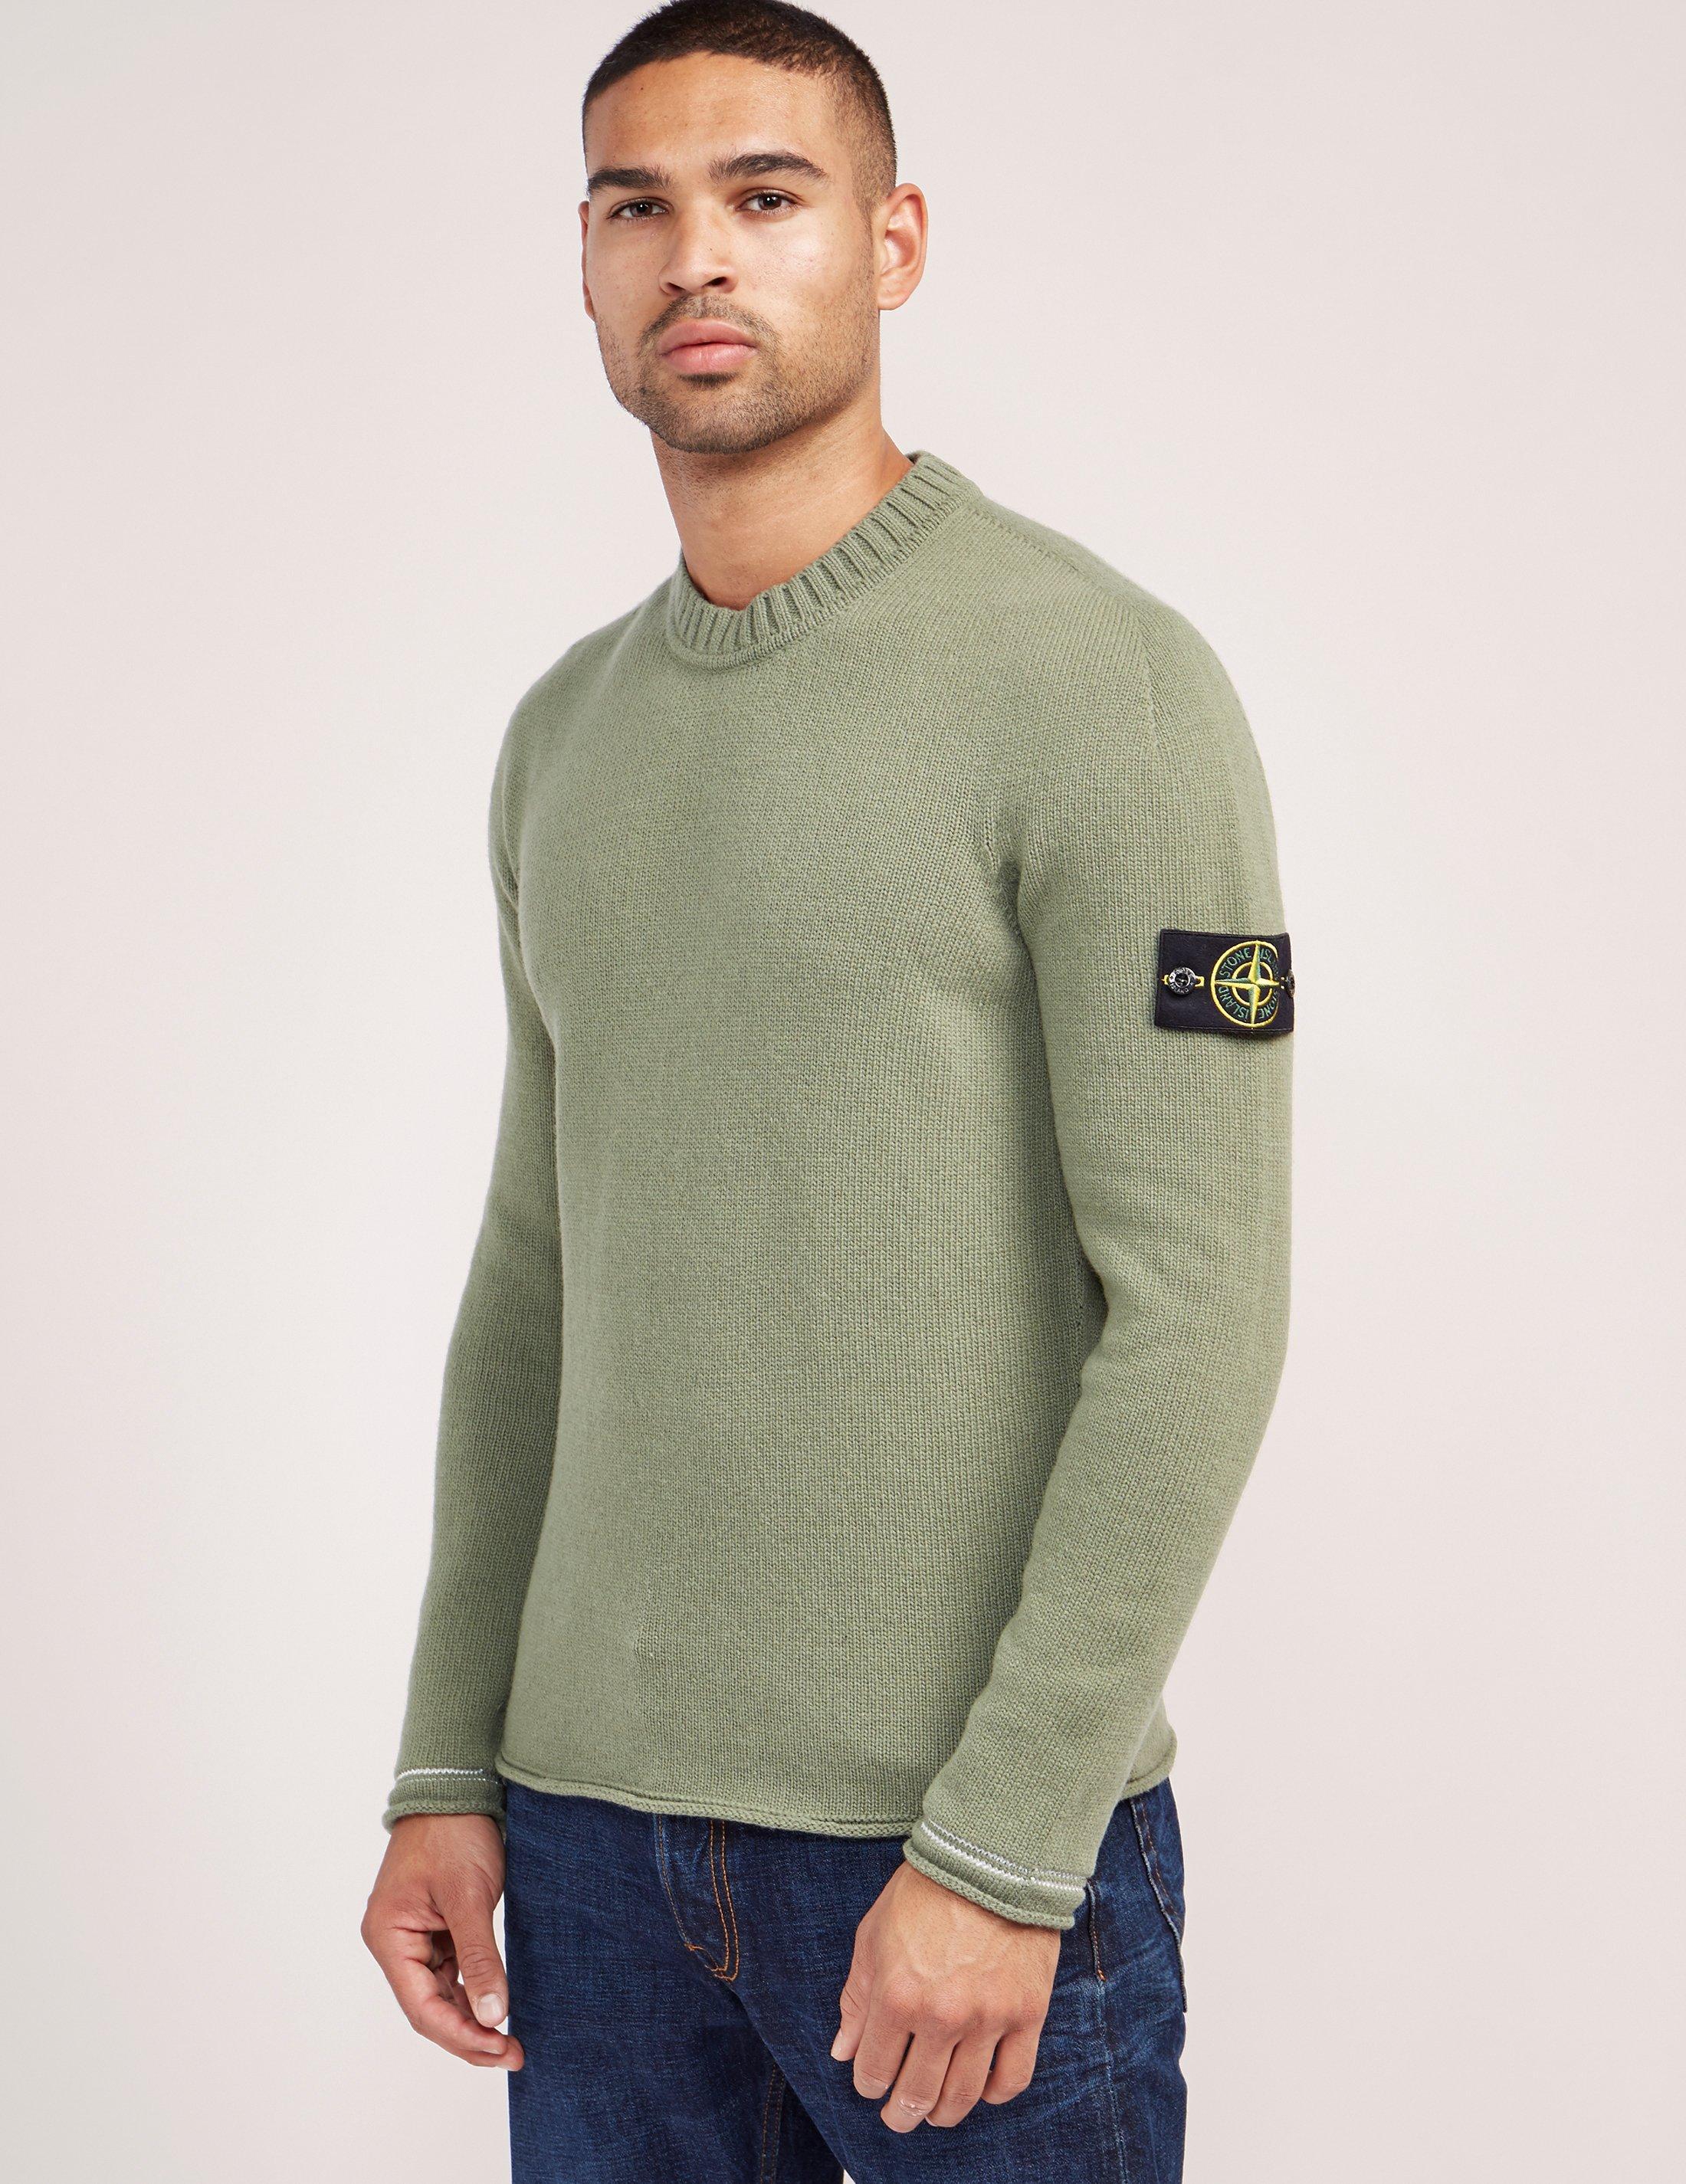 Lime Green Stone Island Jumper Shop Official, 53% OFF | thebighousegroup.com